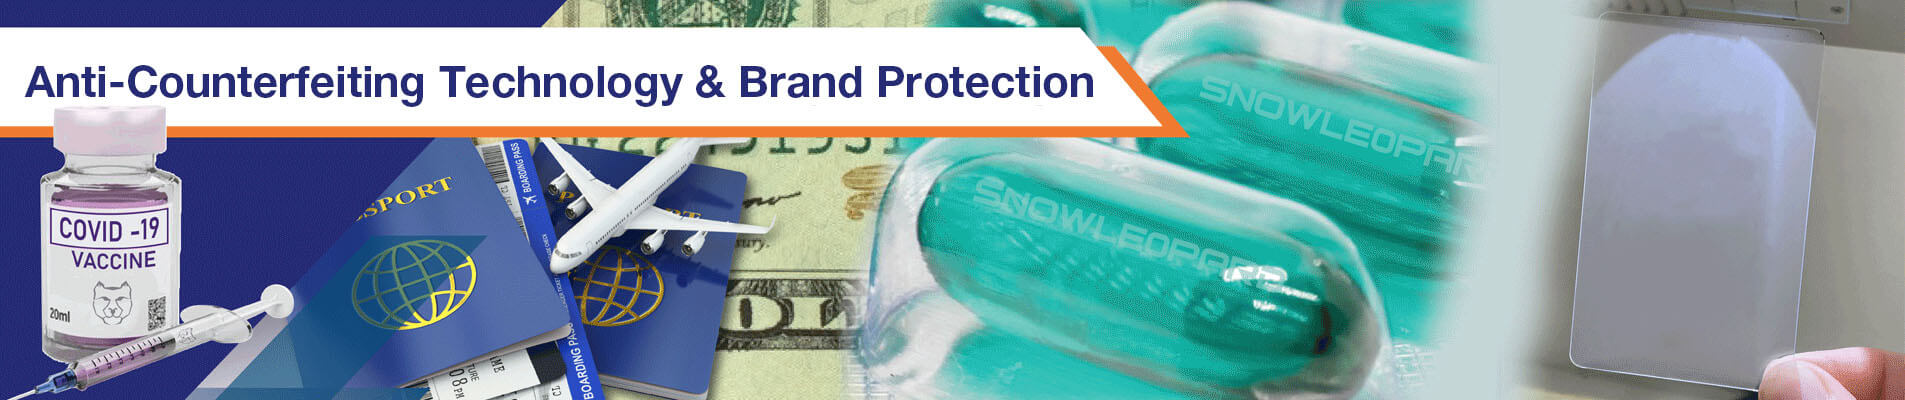 Anti-Counterfeiting Technology - The Sabreen Group, Inc.